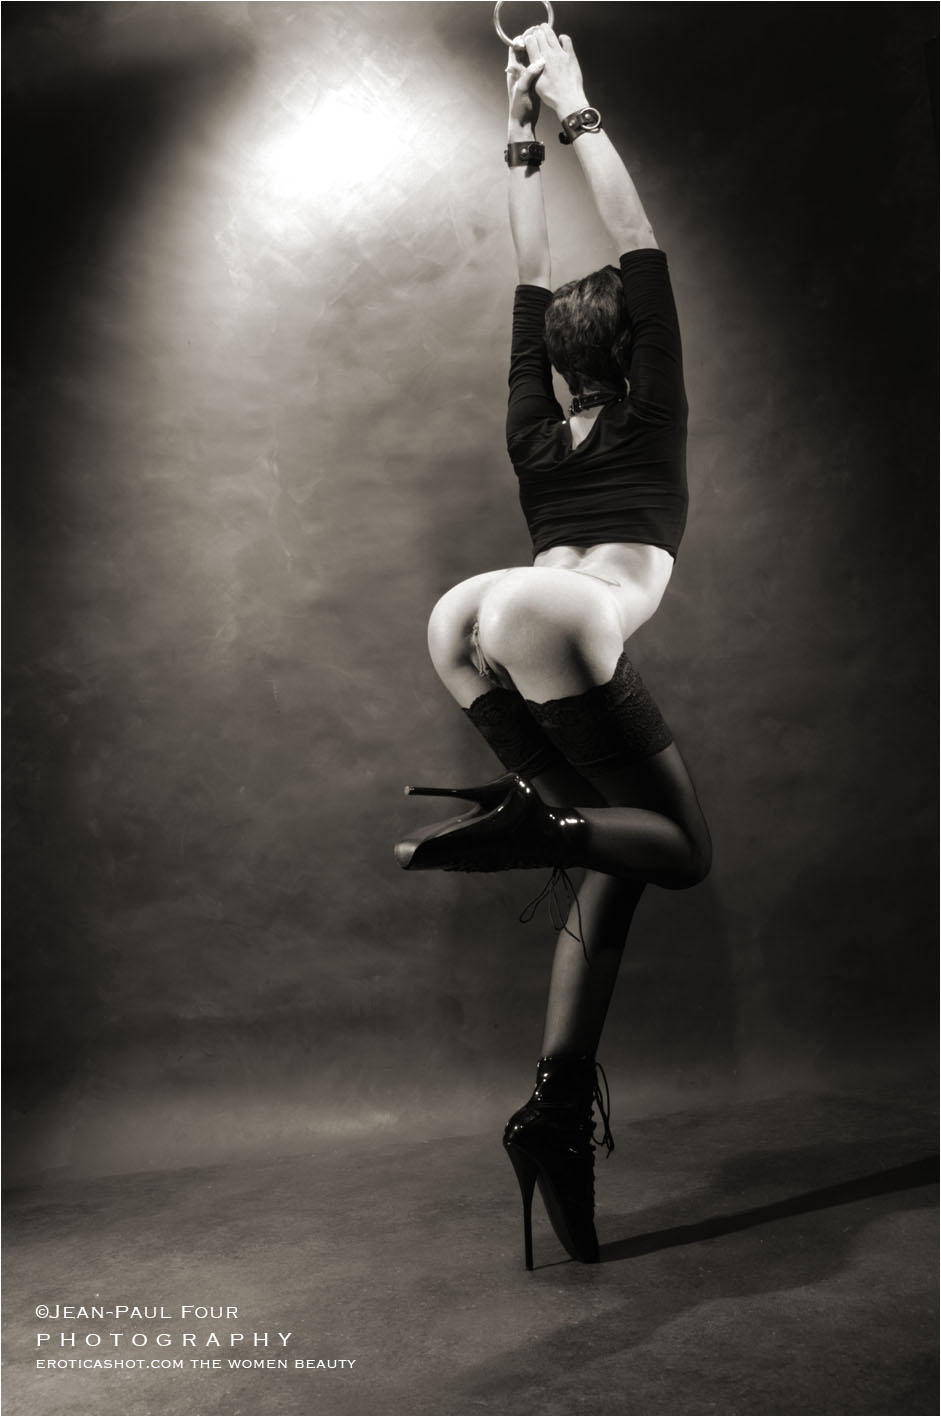 Mme Butt, hot model, amazing ass, ballet shoes, extreme fucking, self suspension, pee, bondage, tail bud, go to eroticashot.com pict by Jean-Paul Four